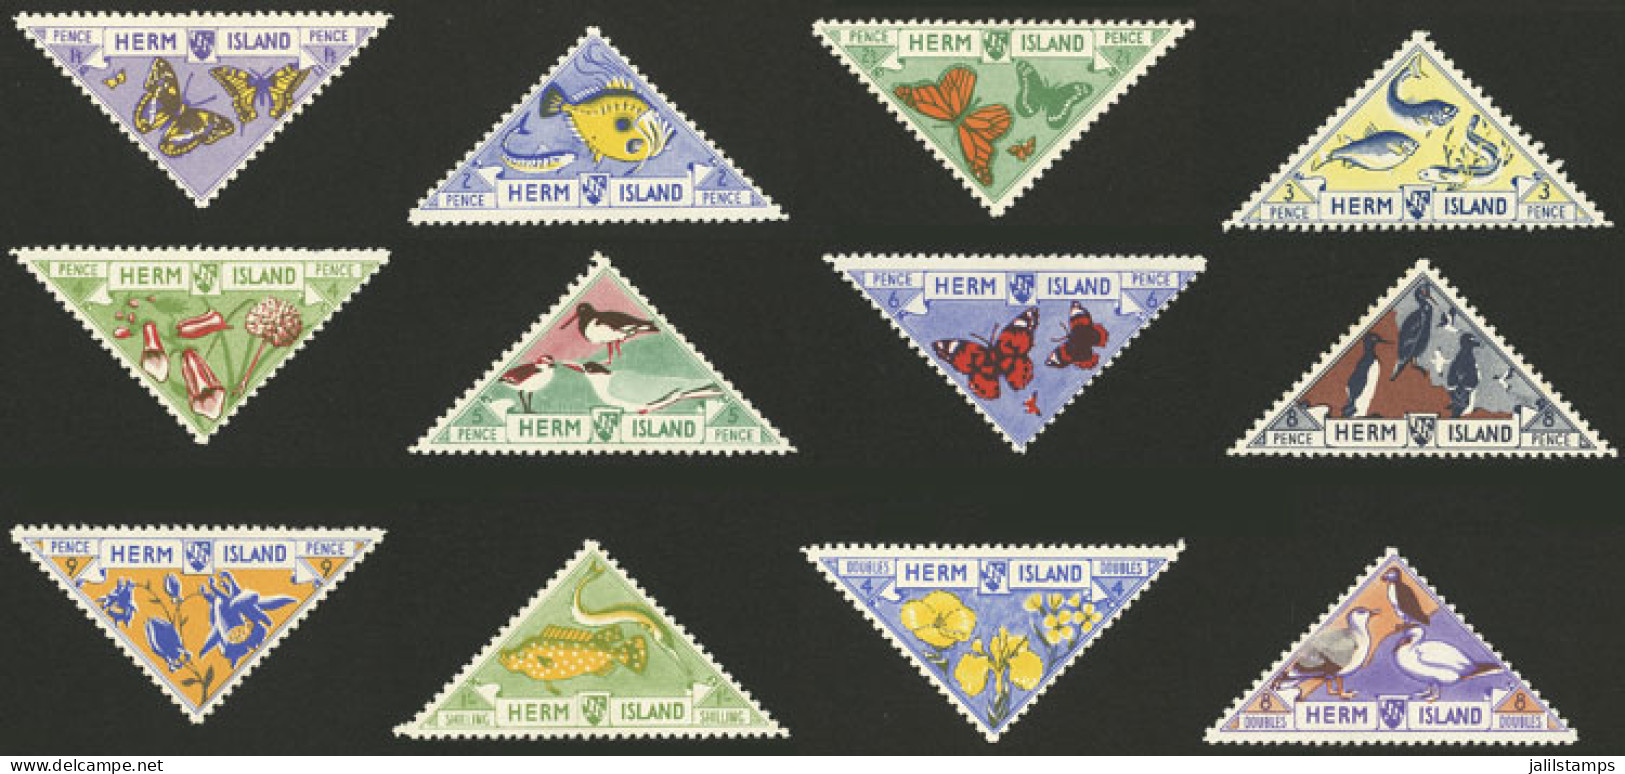 GREAT BRITAIN: HERM ISLAND: Fauna, Set Of 12 Triangular Values, Mint Without Gum, Fine Quality, Very Nice! - Cinderellas